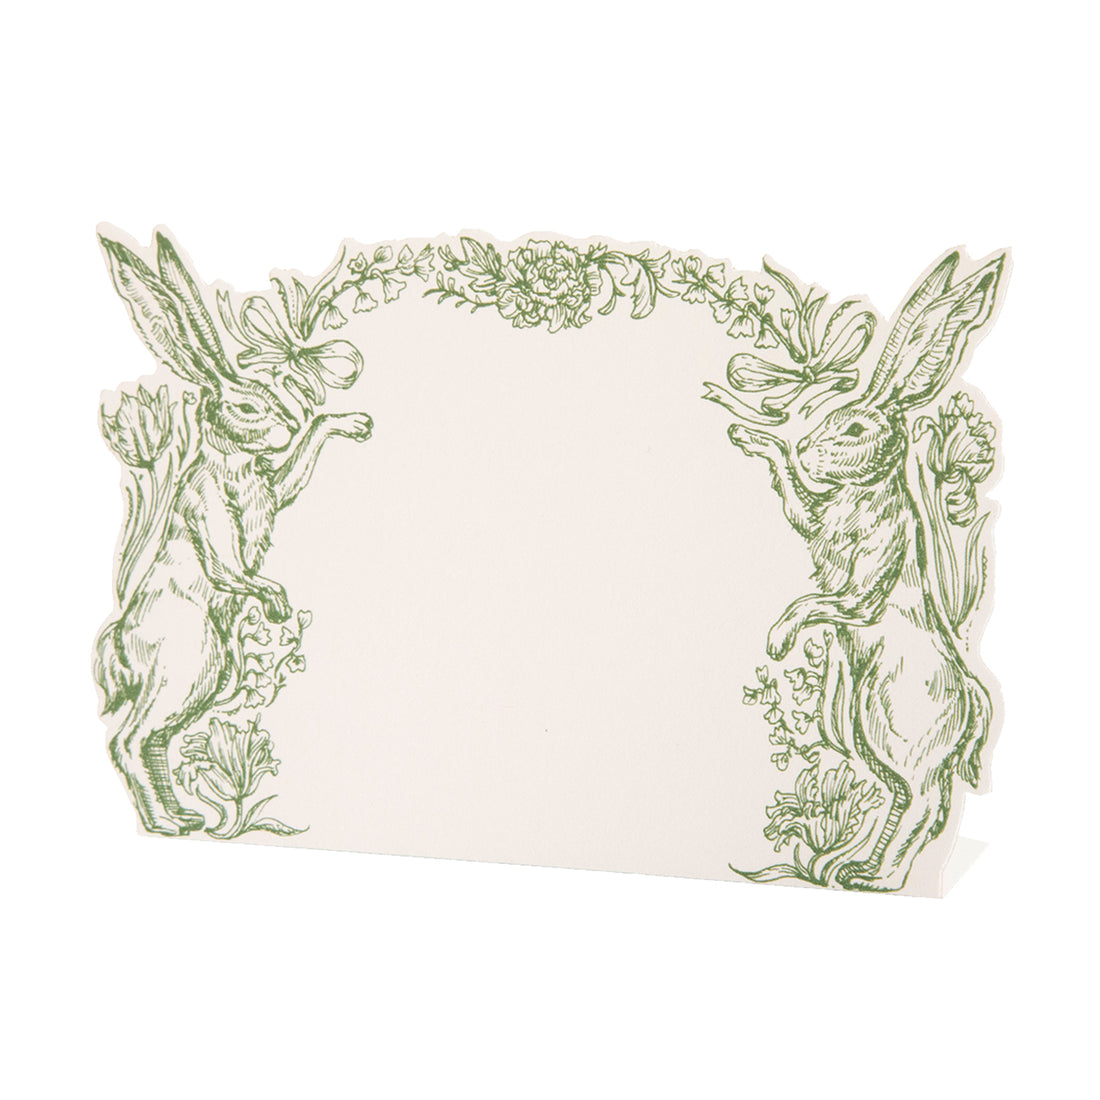 A white, die-cut freestanding place card featuring an illustrated green rabbit on either side and floral embellishments up the sides and across the top edge.